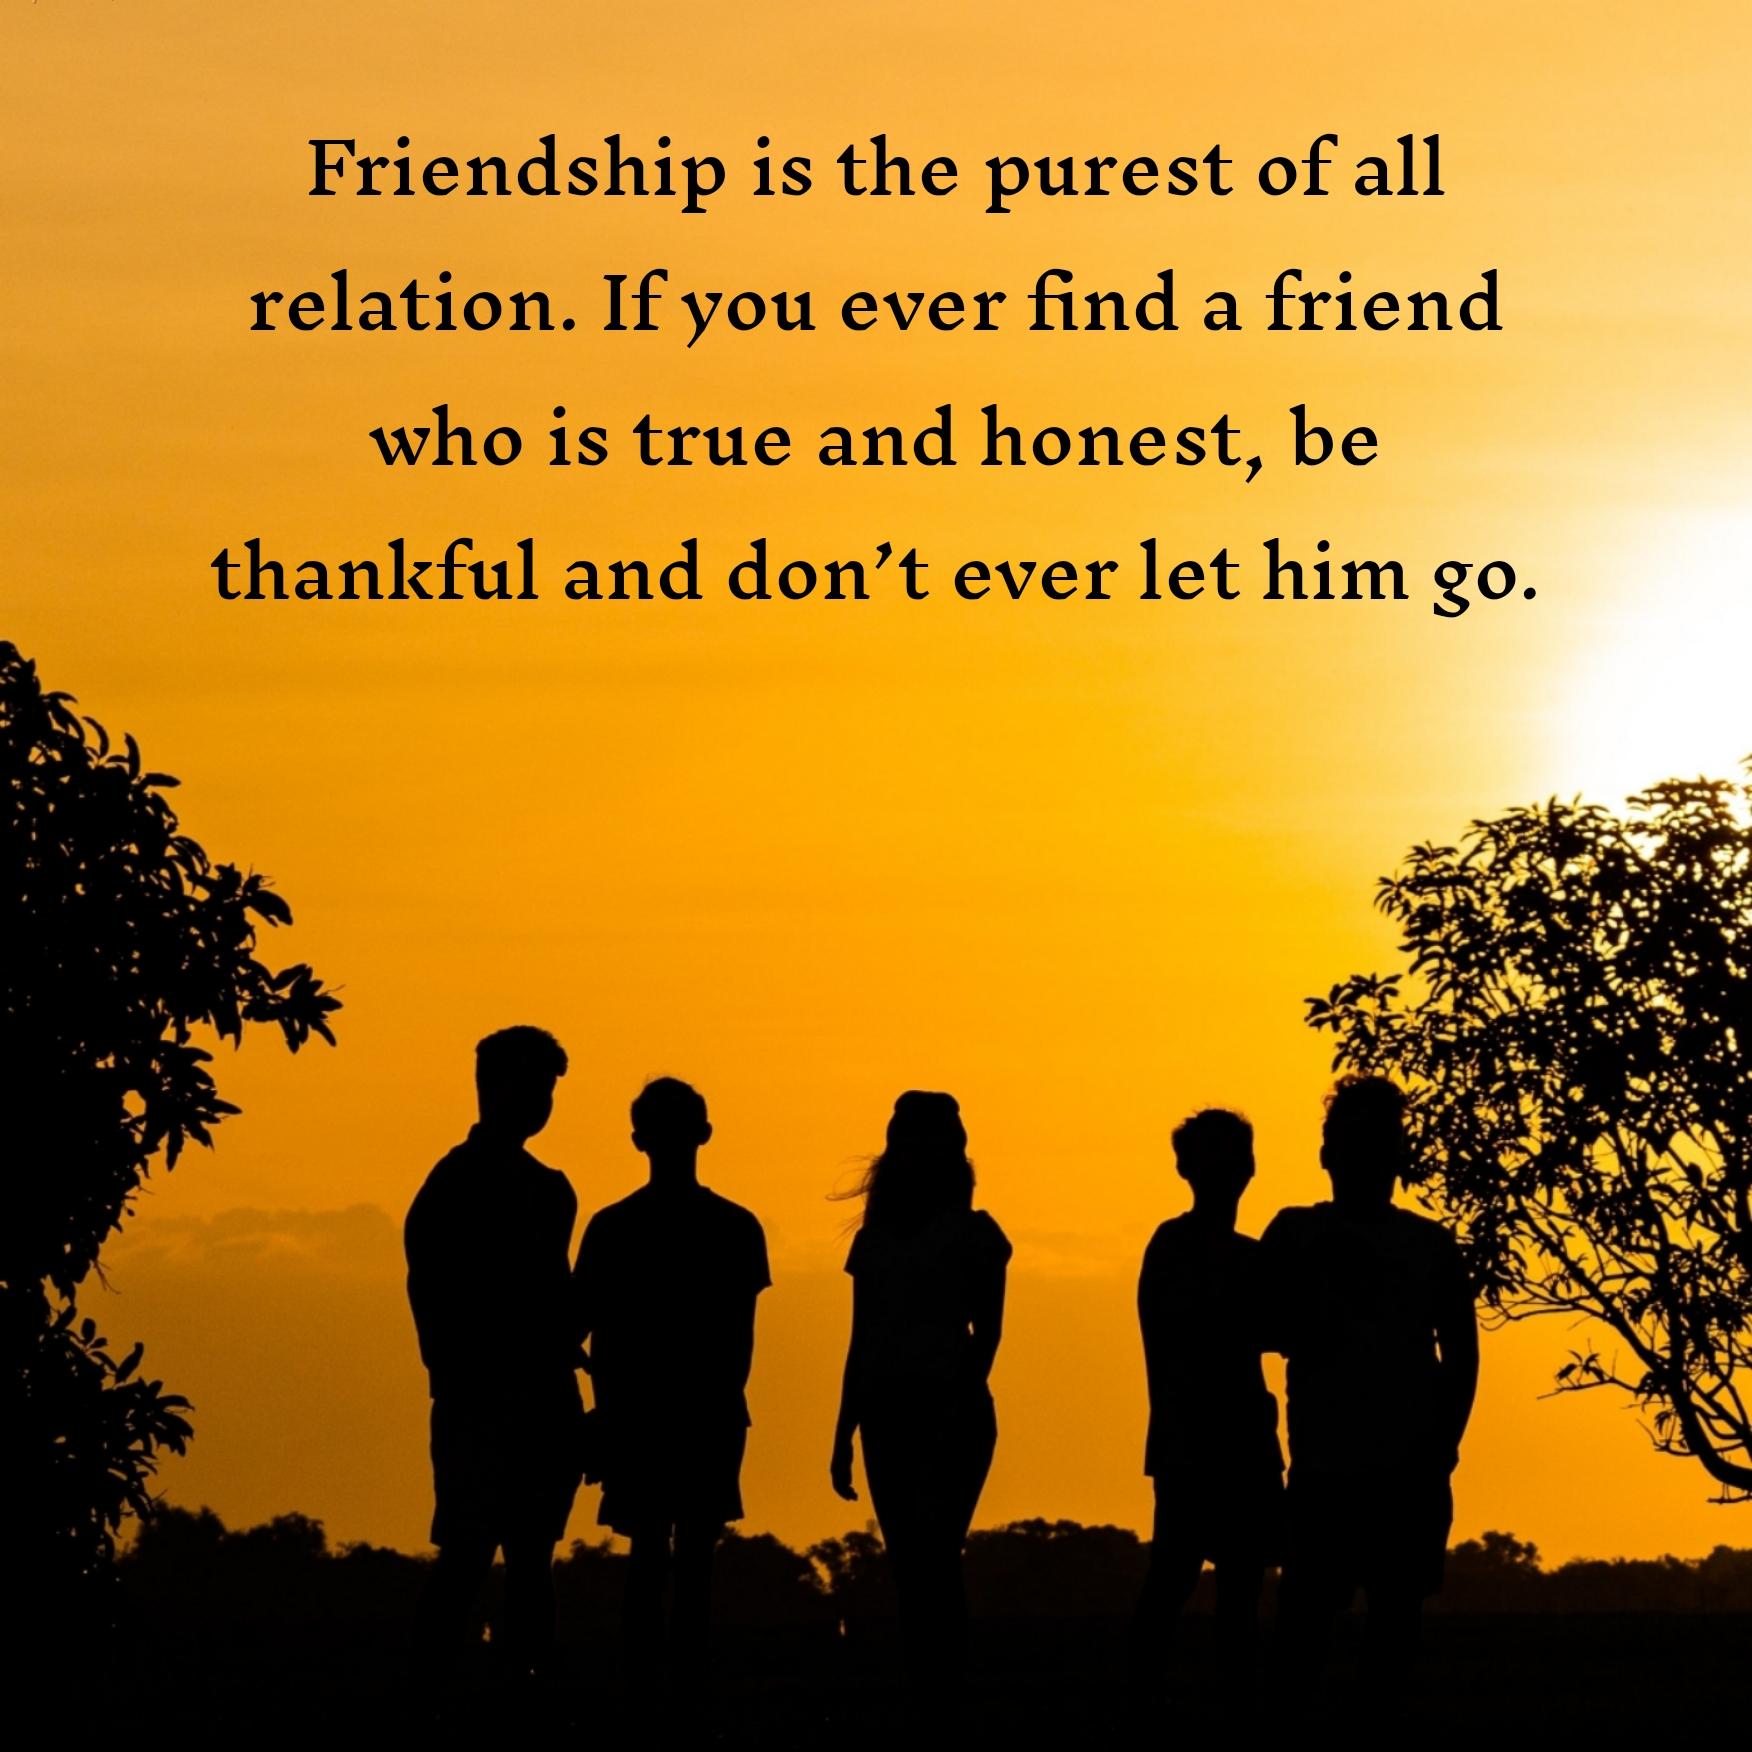 Friendship is the purest of all relation